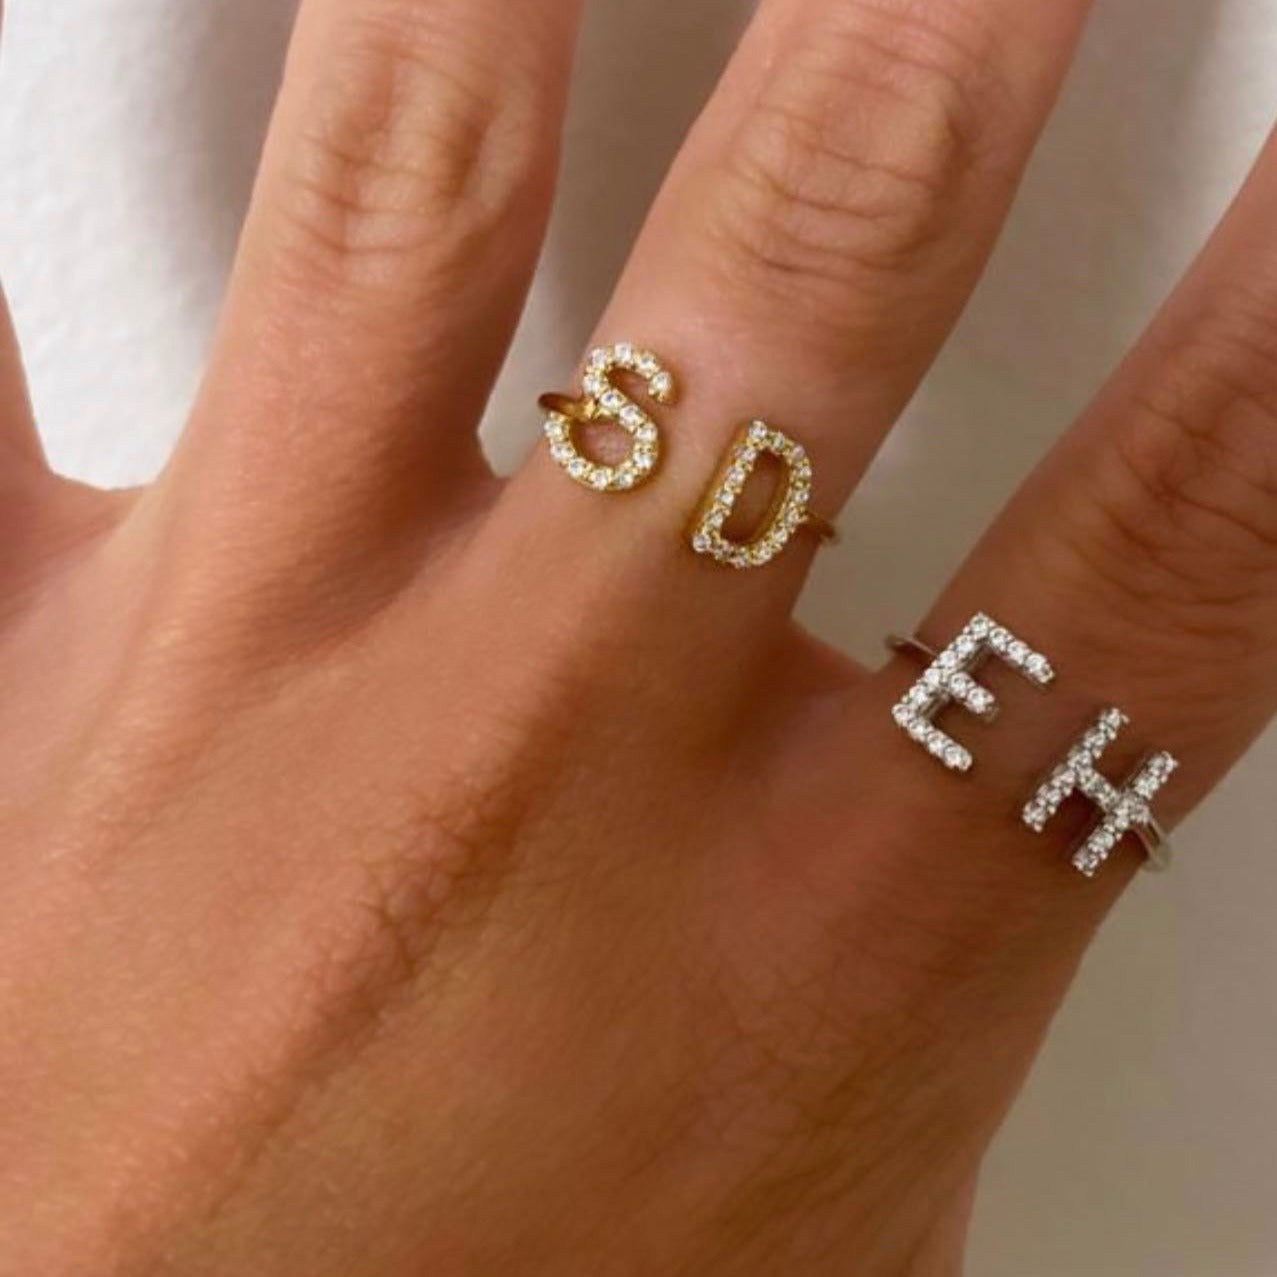 Customized Initial Ring